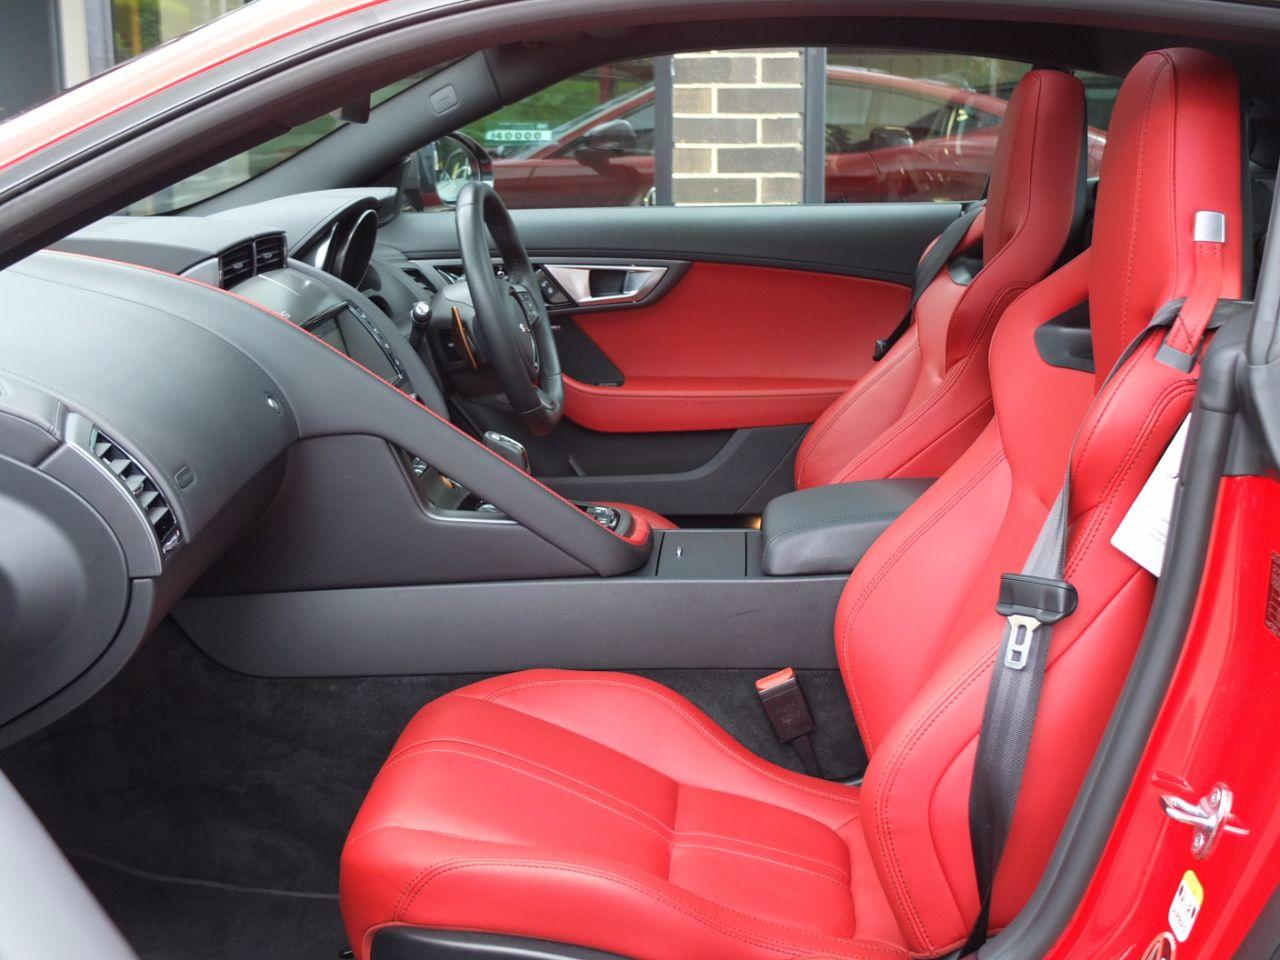 Jaguar F-Type 3.0 Supercharged V6 S Auto 380ps Coupe Petrol Caldera Red